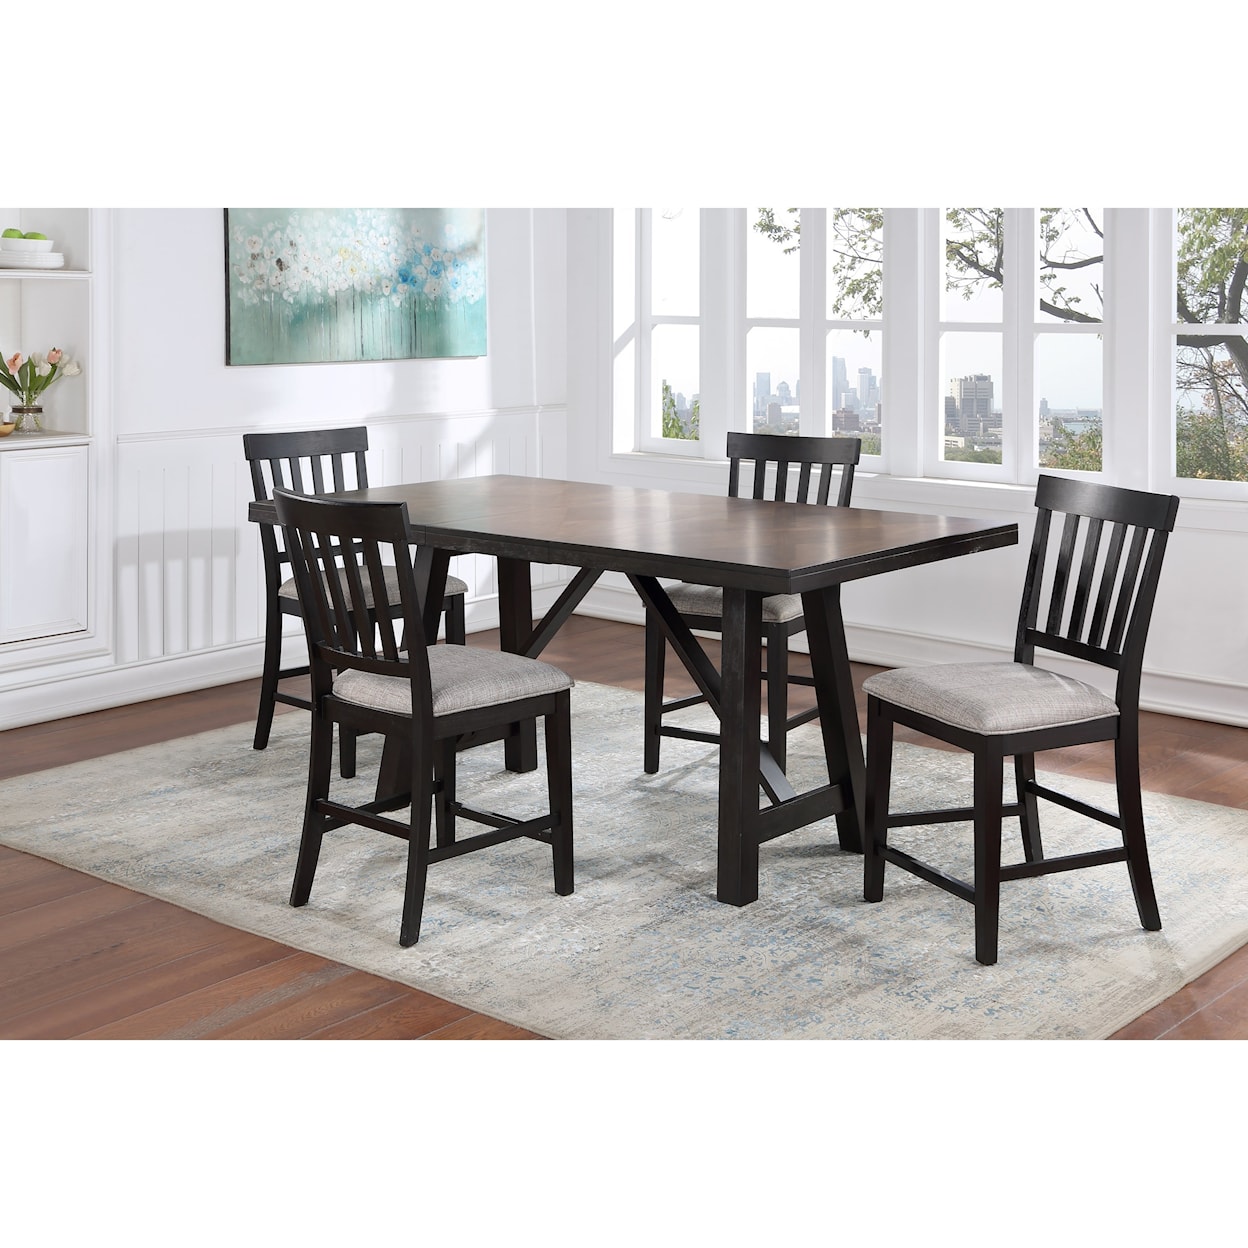 Steve Silver Halle 5-Piece Table and Chair Set